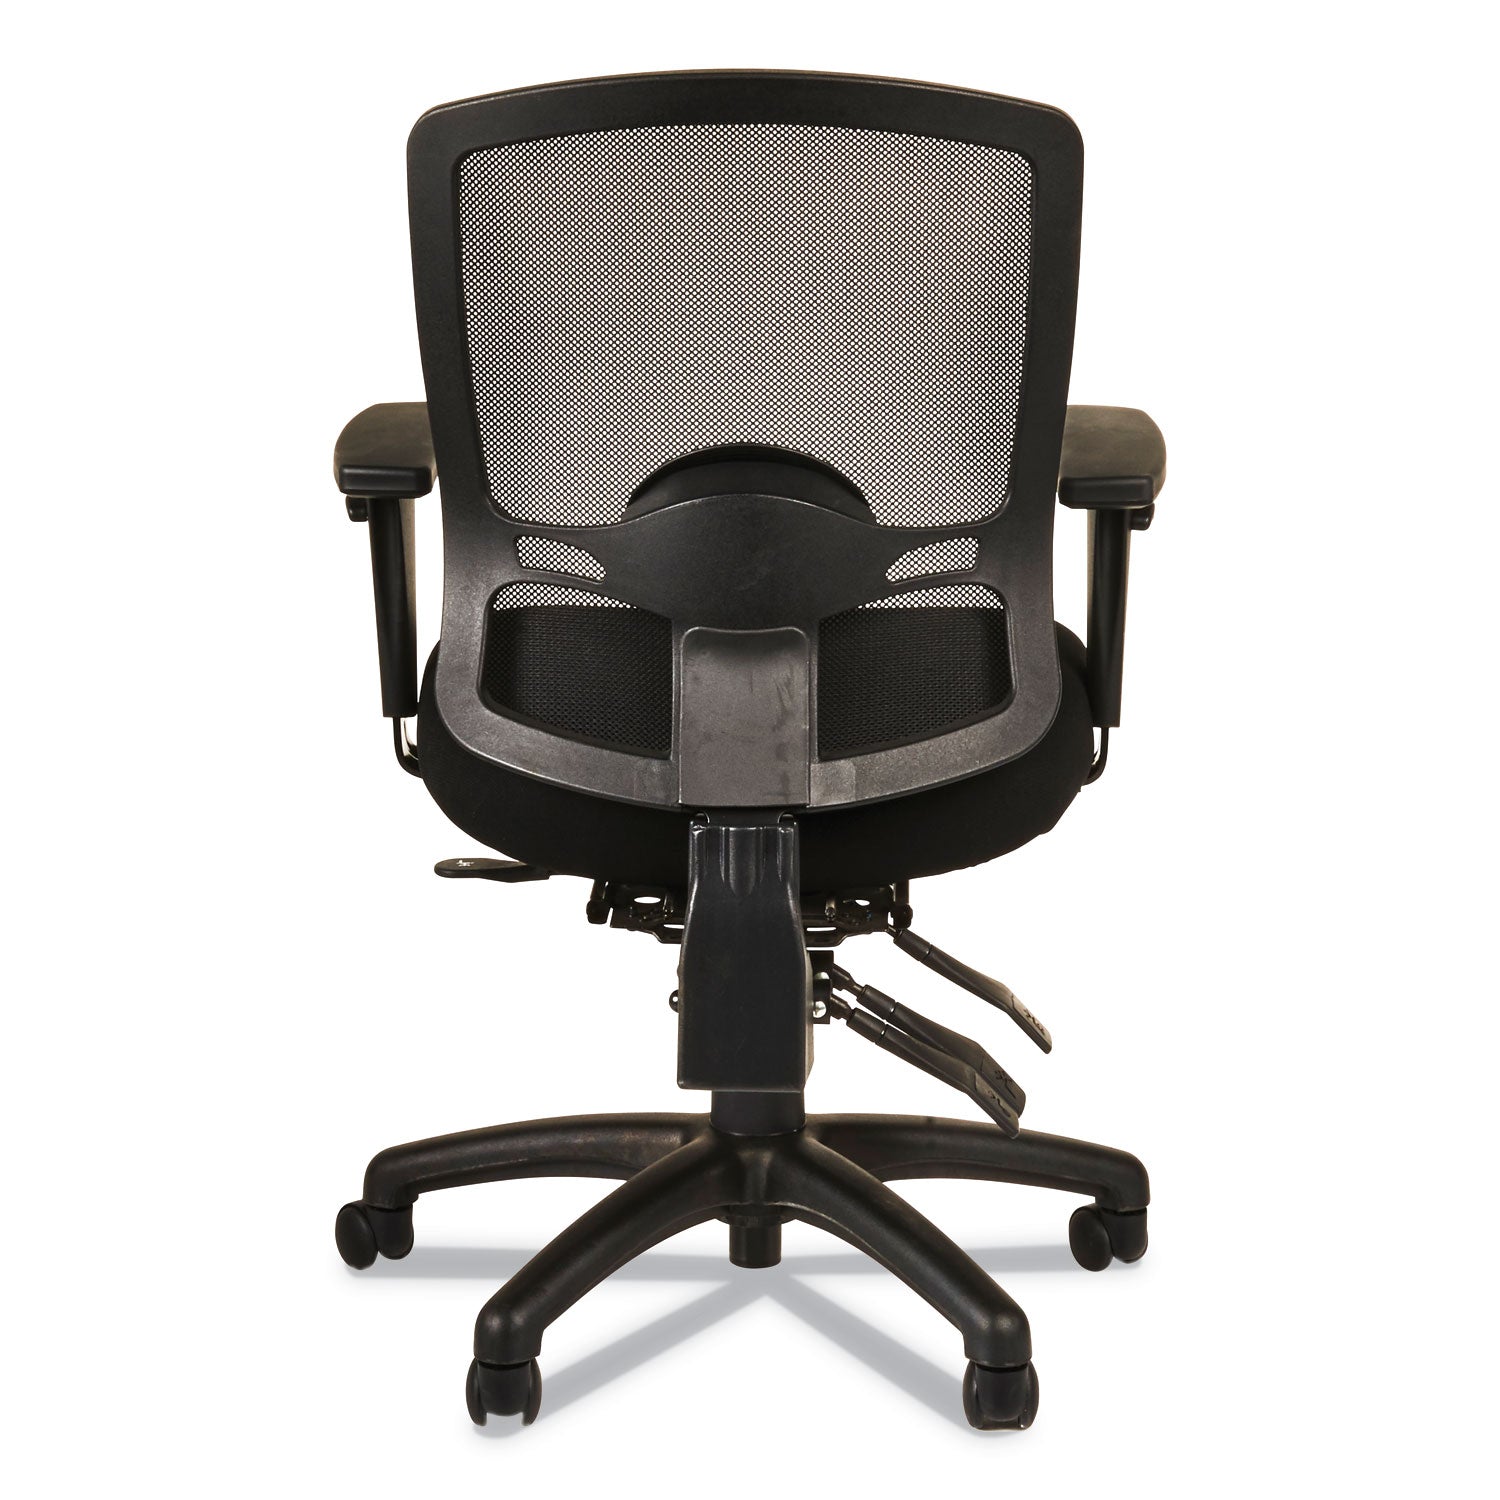 alera-etros-series-mid-back-multifunction-with-seat-slide-chair-supports-up-to-275-lb-1783-to-2145-seat-height-black_aleet4217 - 5